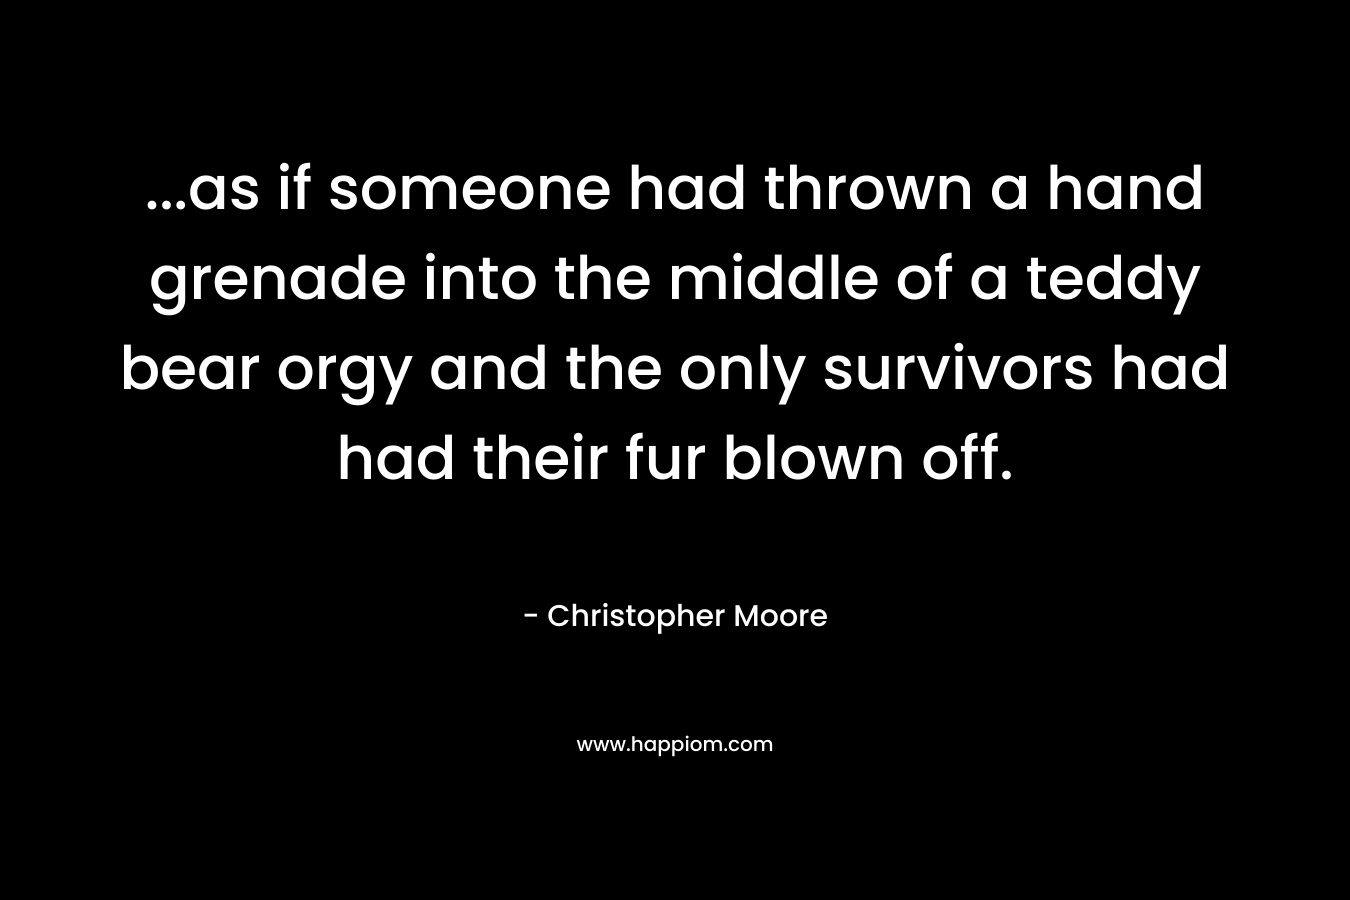 …as if someone had thrown a hand grenade into the middle of a teddy bear orgy and the only survivors had had their fur blown off. – Christopher Moore